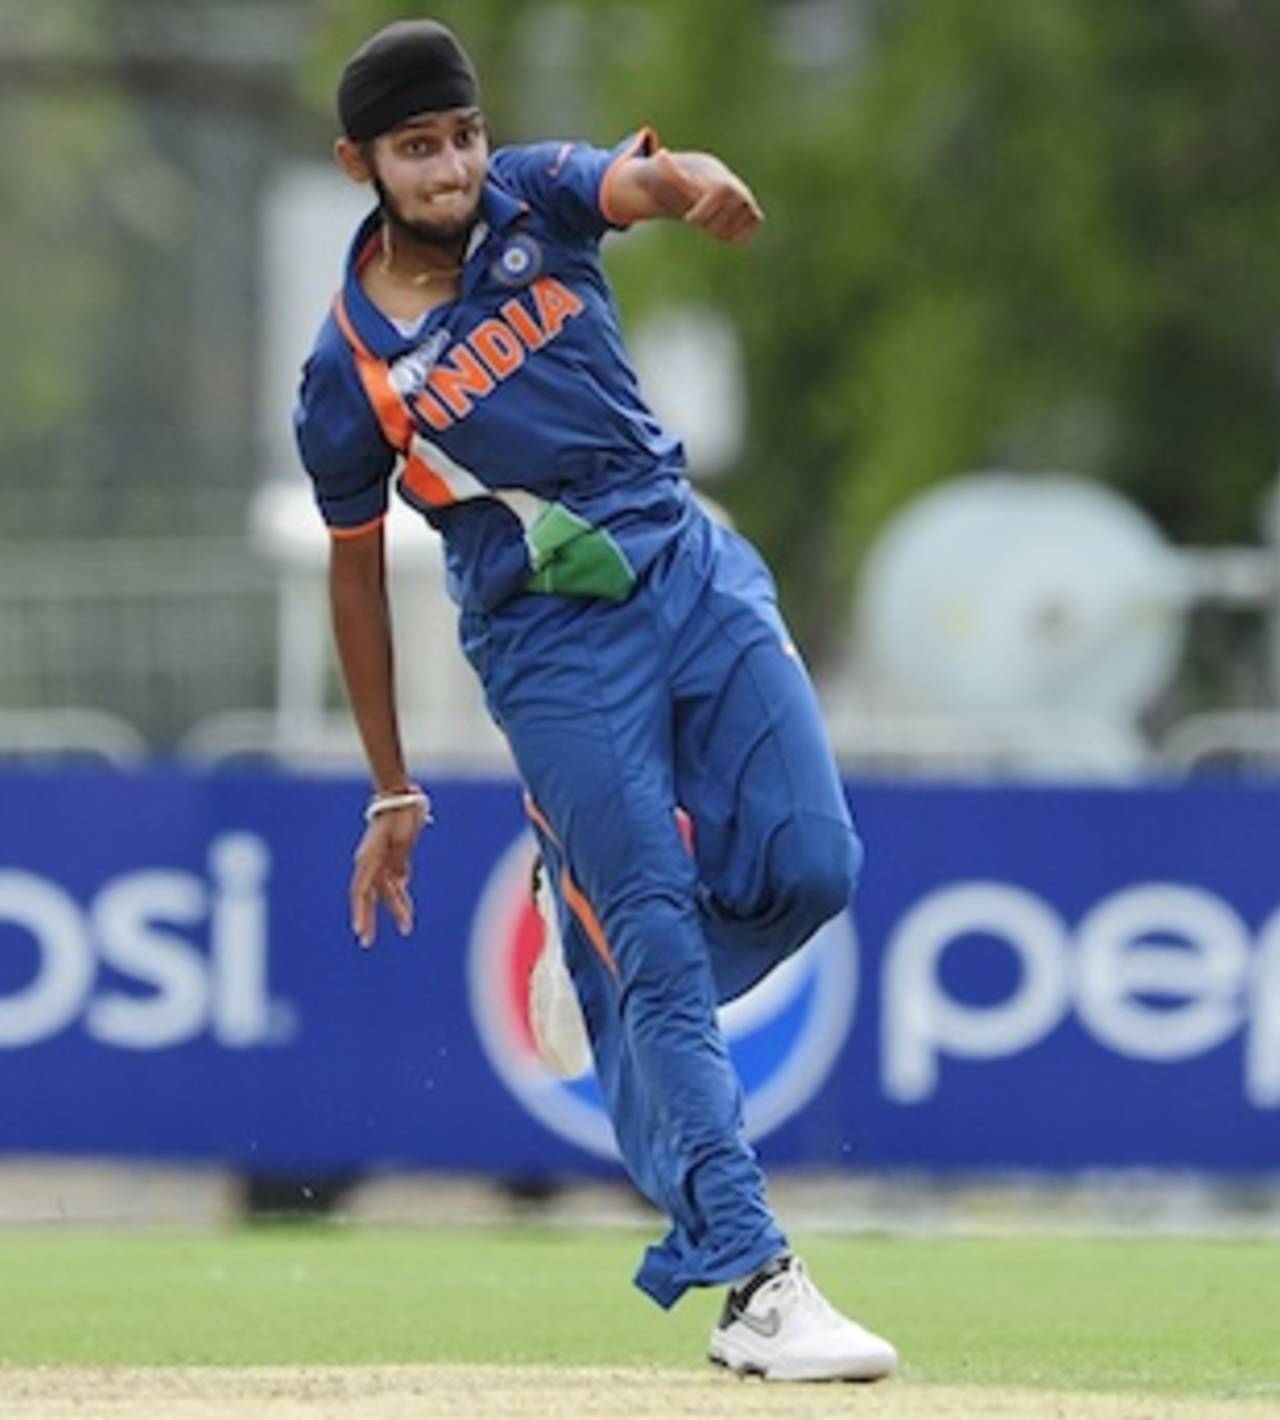 Harmeet Singh's left-arm spin kept the batsmen quiet through the middle overs, Australia v India, ICC U-19 World Cup, final, Townsville